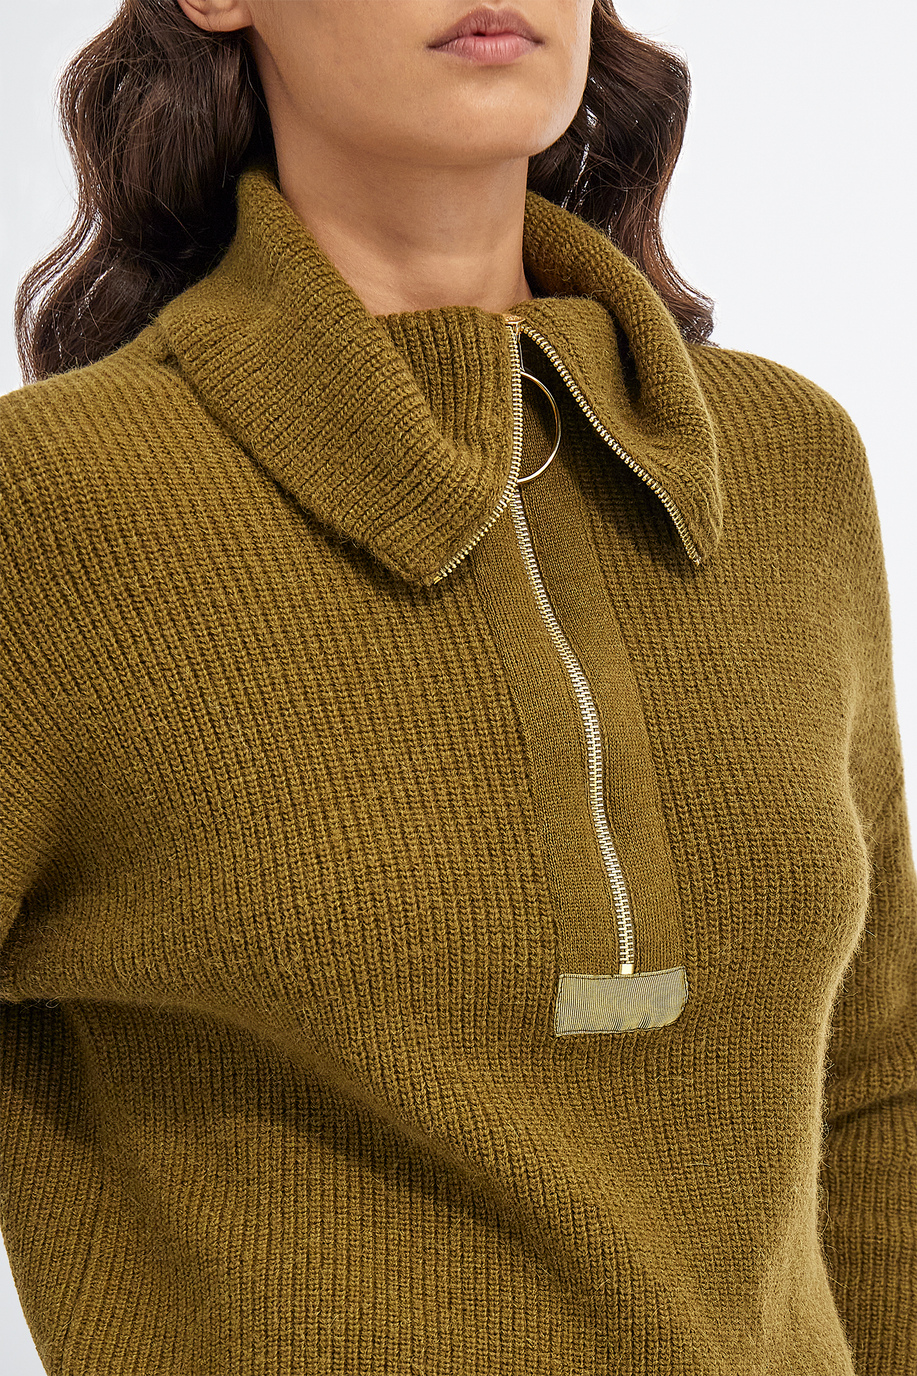 Women’s knitted sweater in alpaca regular fit with zip - Apparel | La Martina - Official Online Shop